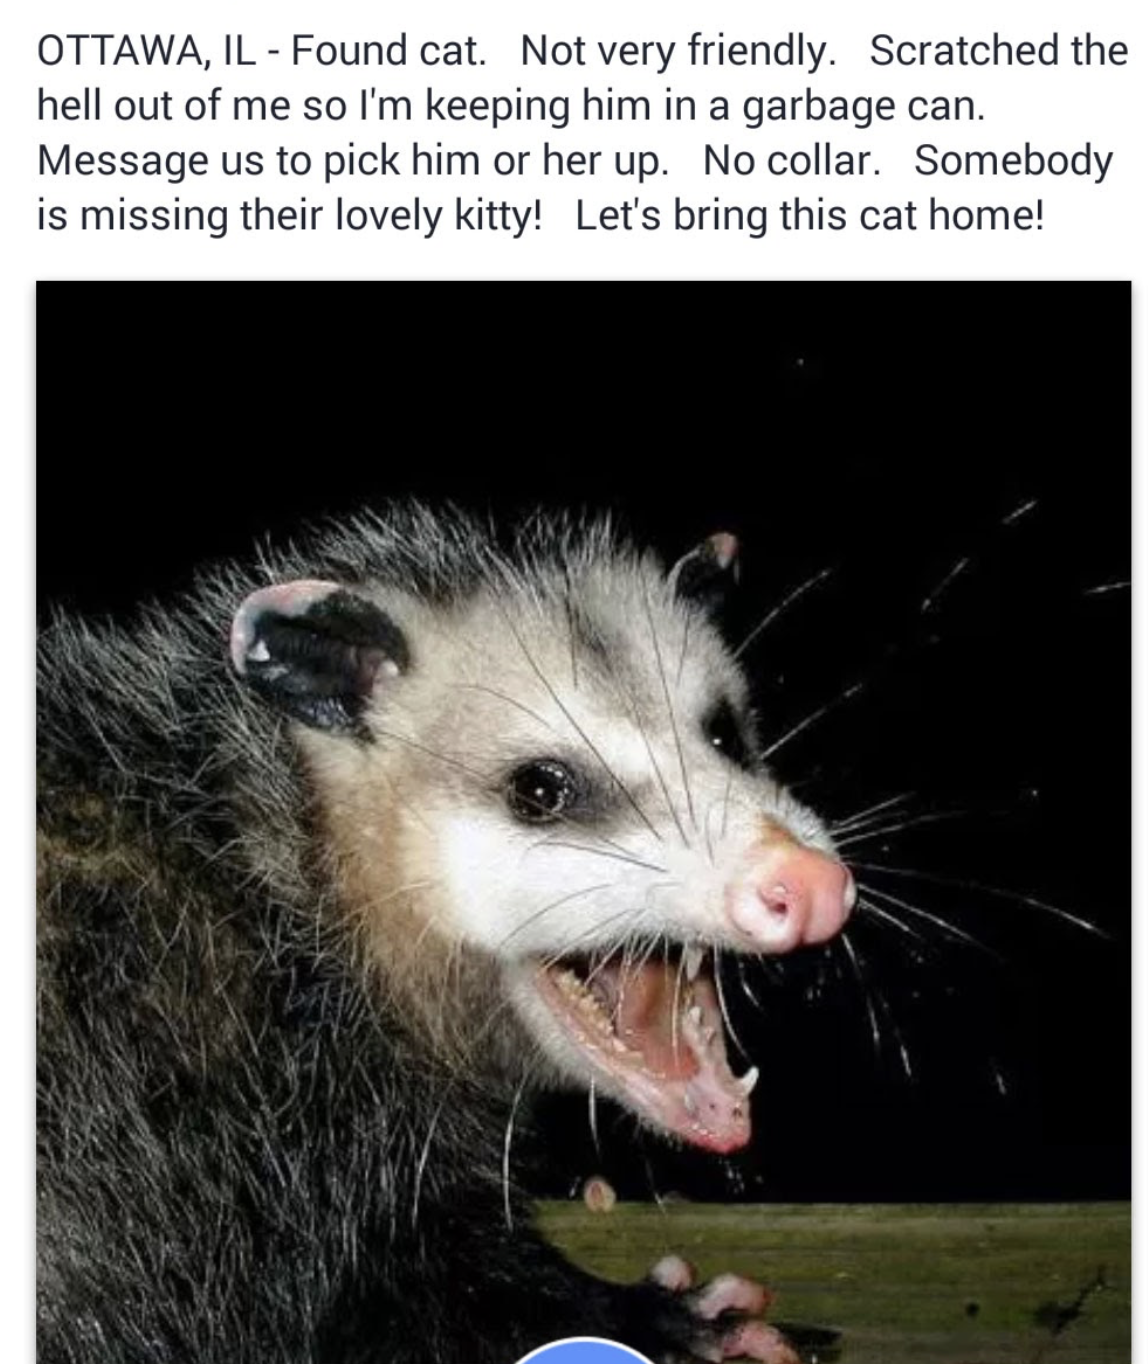 american possums - Ottawa, Il Found cat. Not very friendly. Scratched the hell out of me so I'm keeping him in a garbage can. Message us to pick him or her up. No collar. Somebody is missing their lovely kitty! Let's bring this cat home!